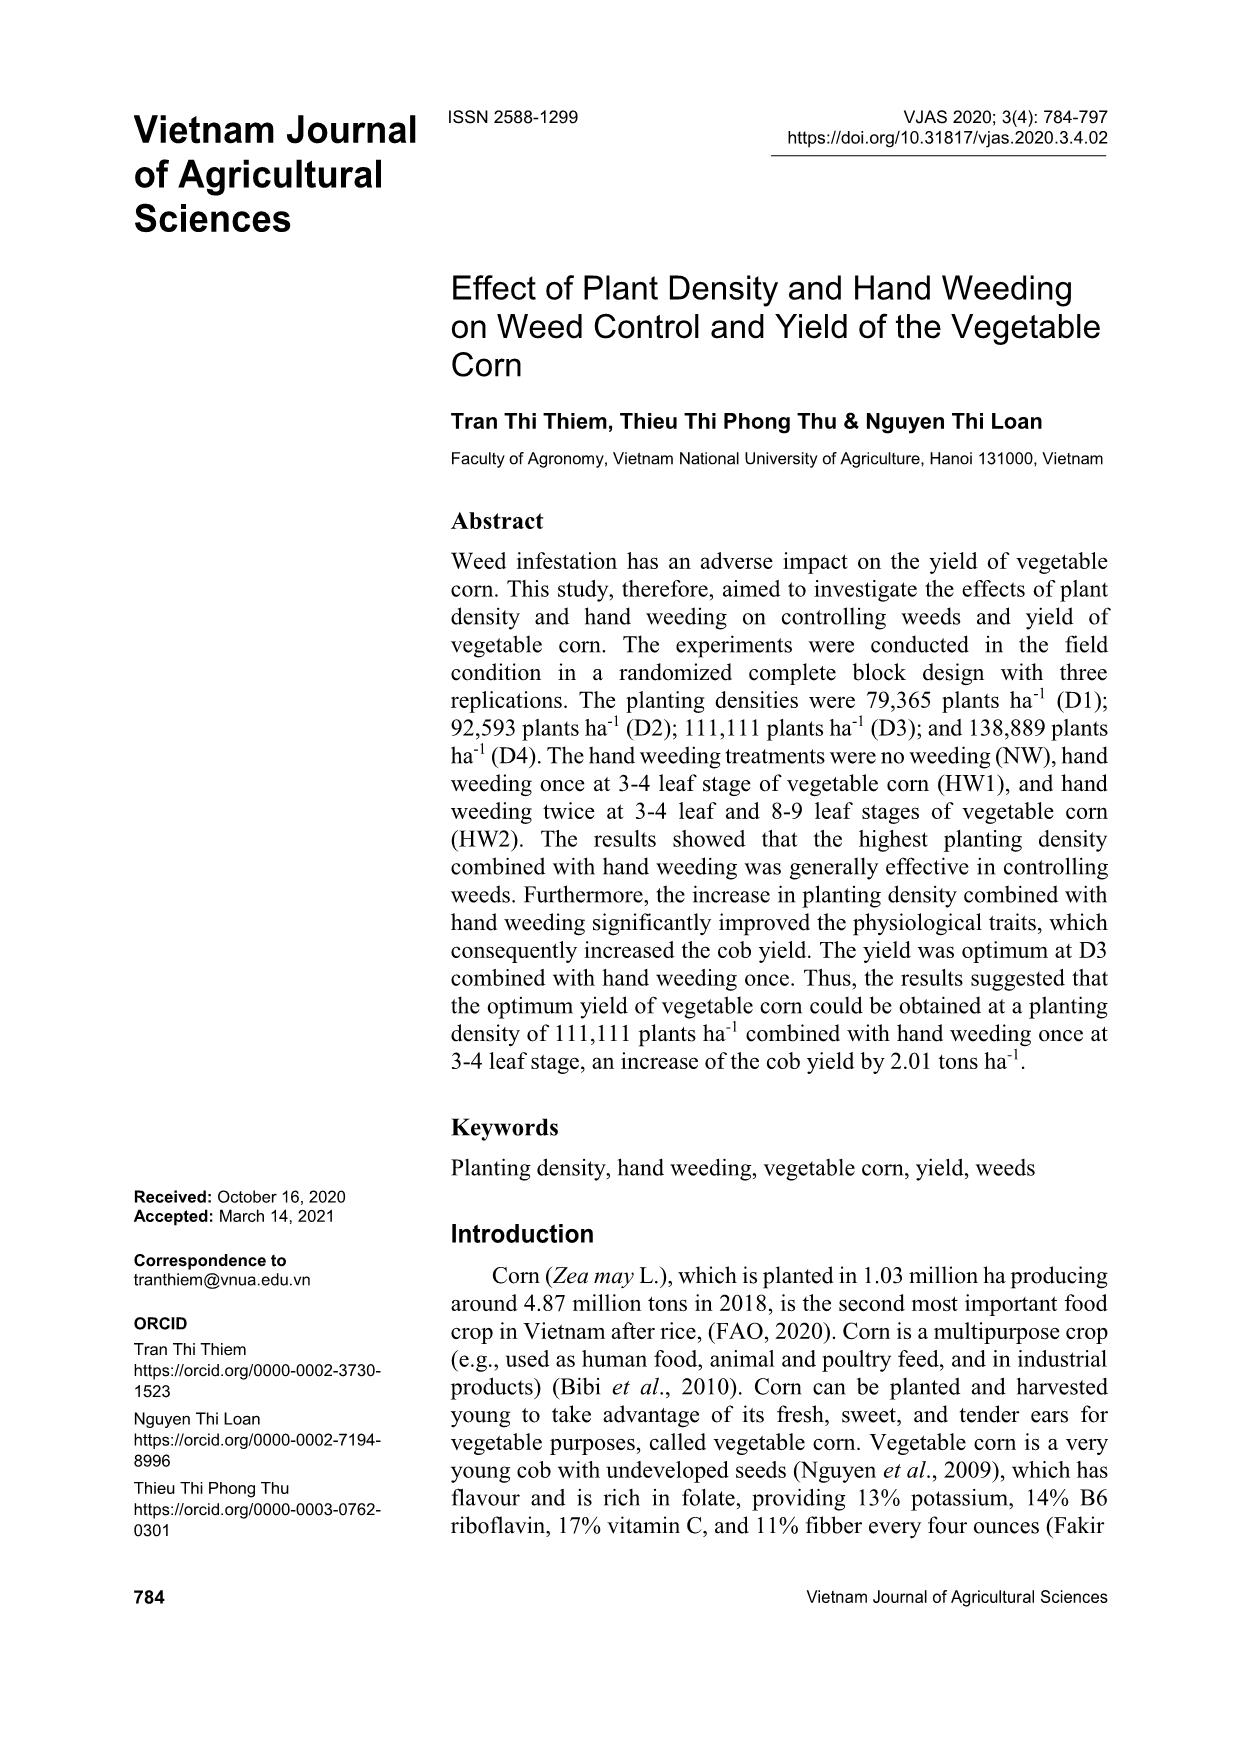 Effect of plant density and hand weeding on weed control and yield of the vegetable corn trang 1